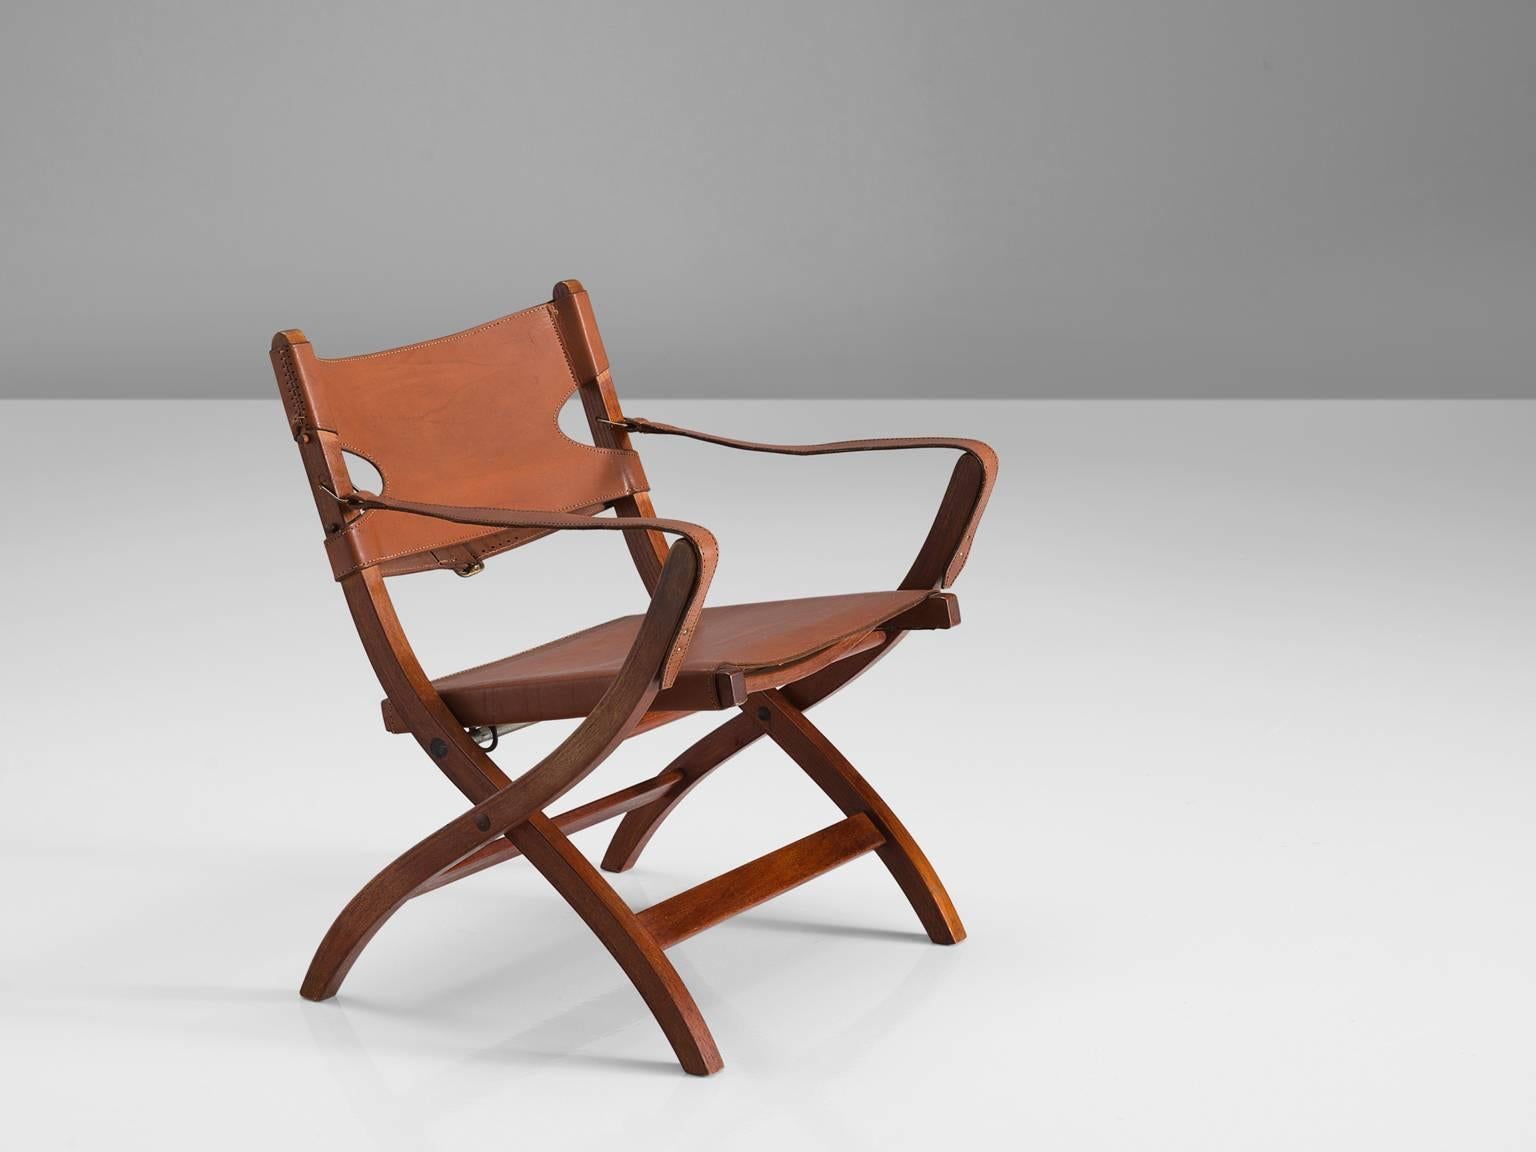 Poul Hundevad, folding chair, in oak and leather, Denmark, 1950s.

This folding chair has X-shaped legs, and is inspired on ancient Egyptian thrones and chairs. The frame is from solid oak. The seating and back are made of cognac colored to brown